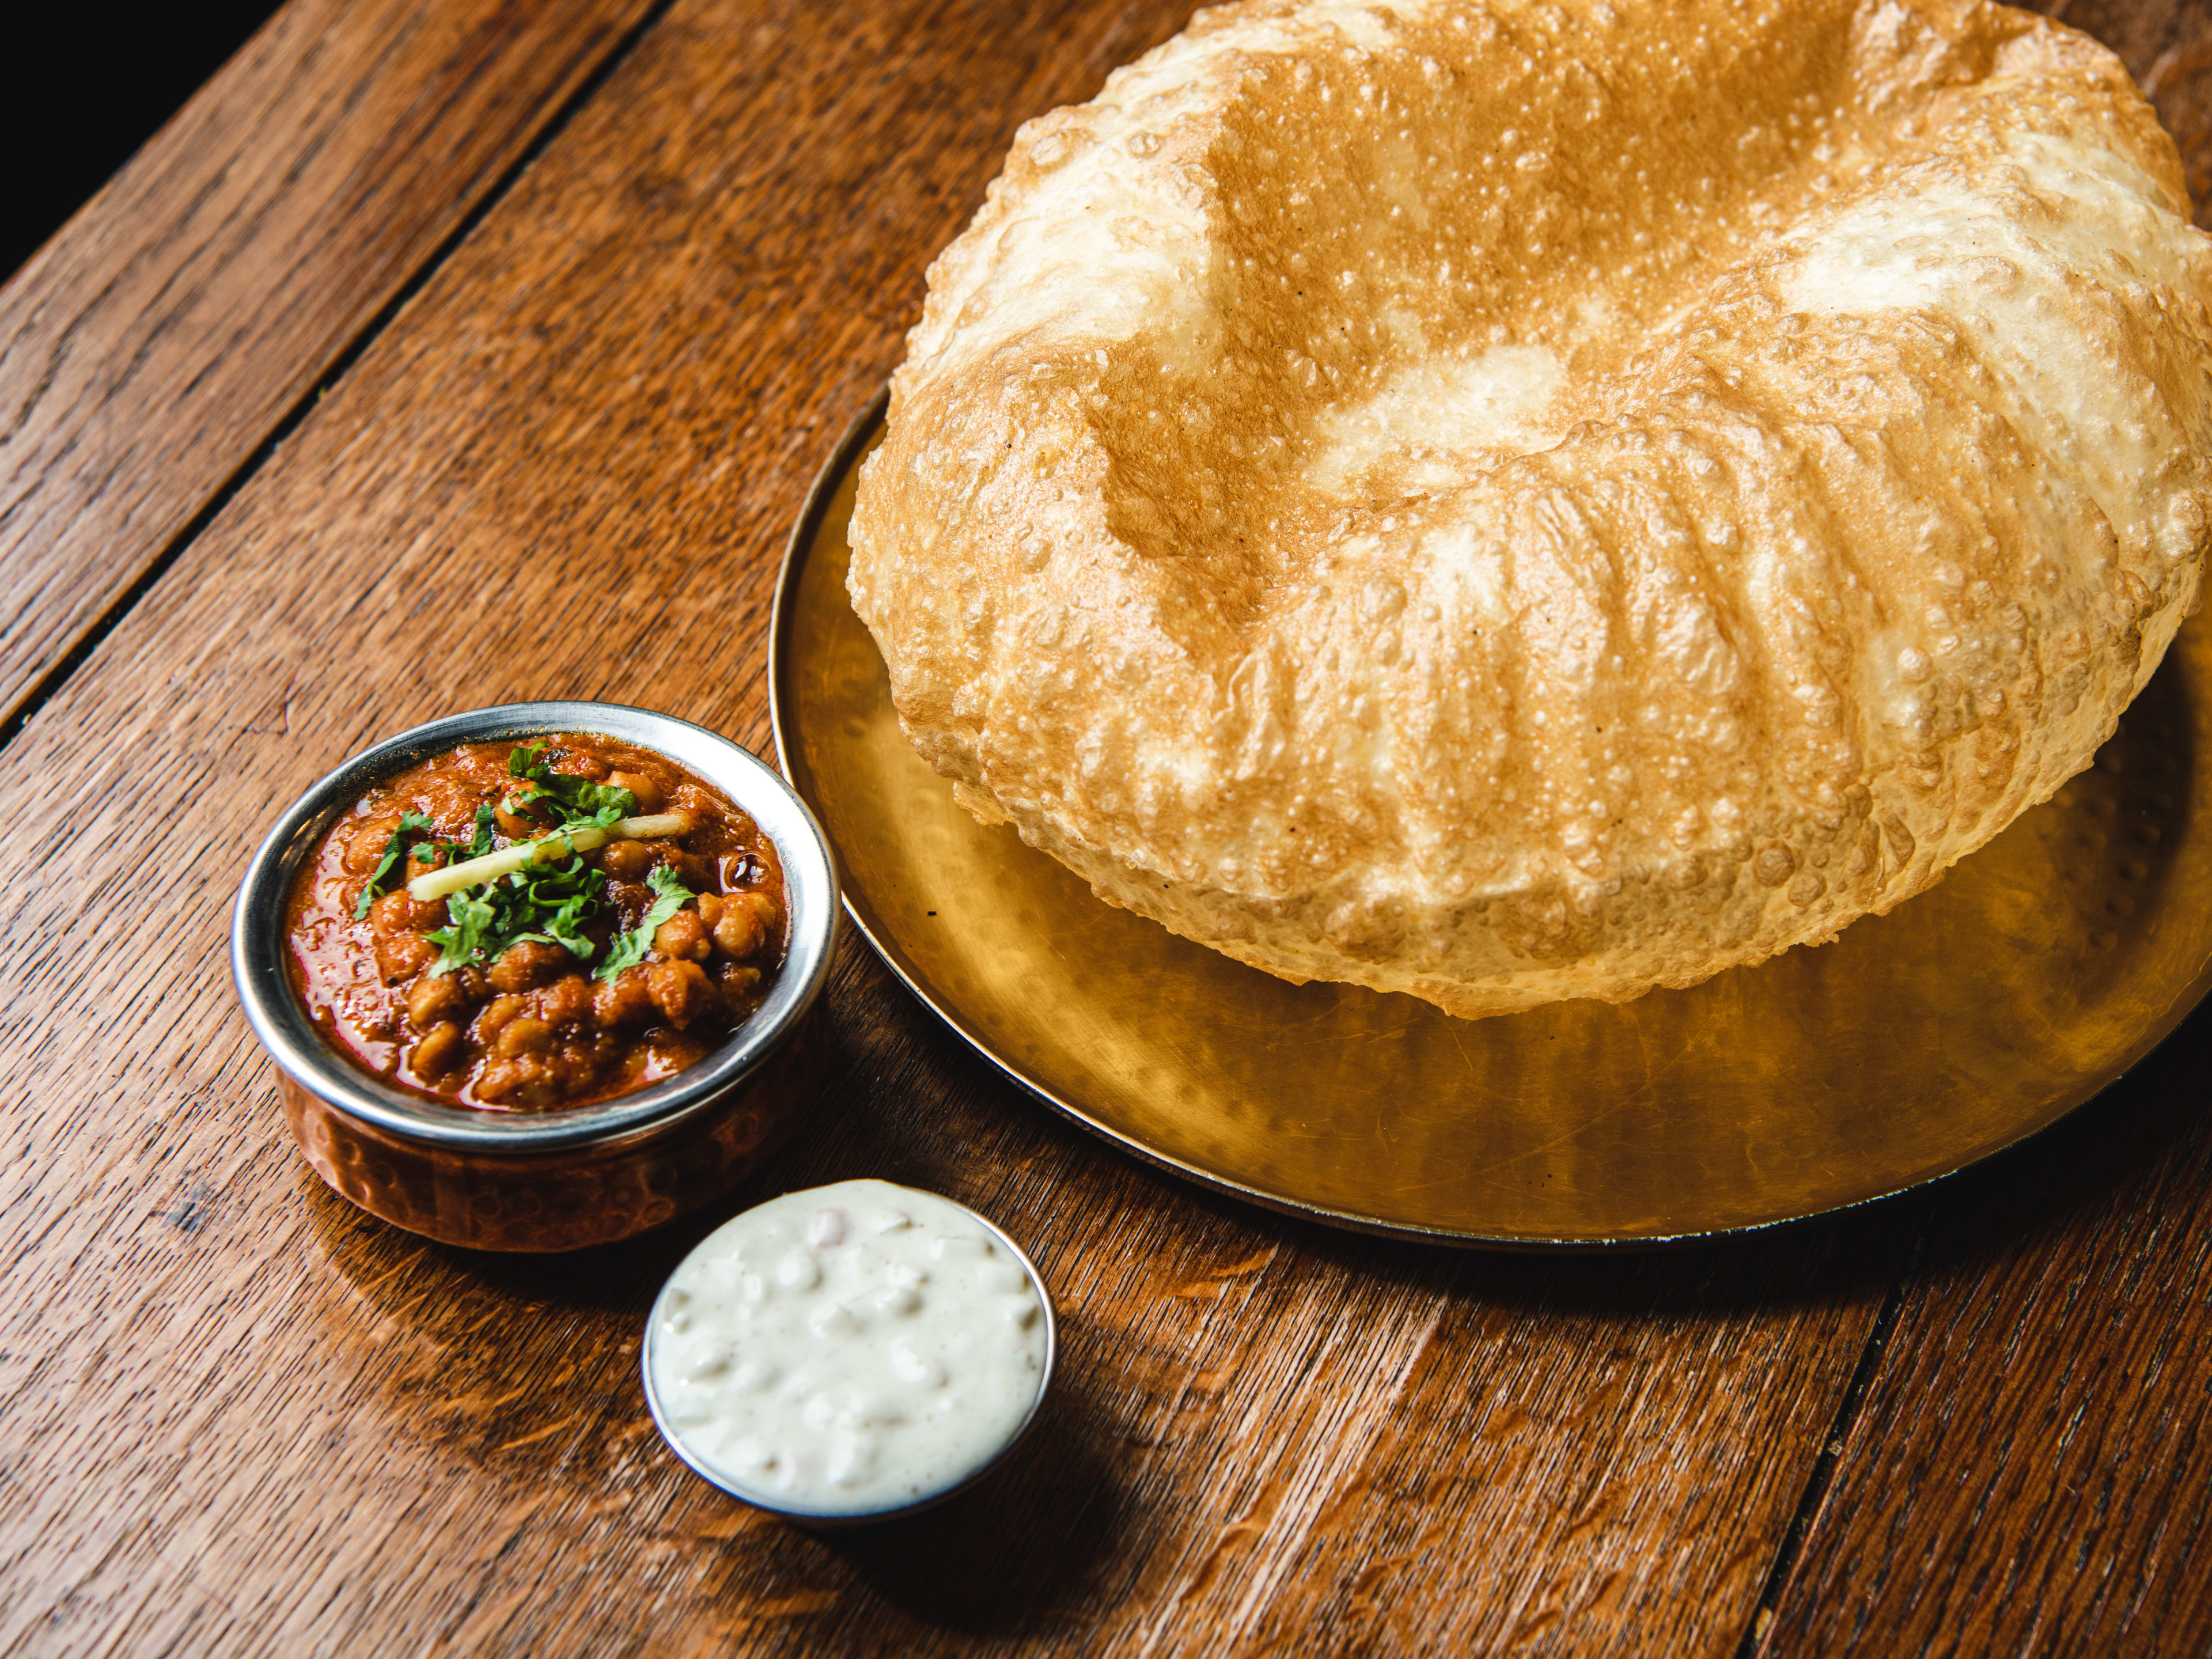 The channa bhatura from The Tamil Prince.